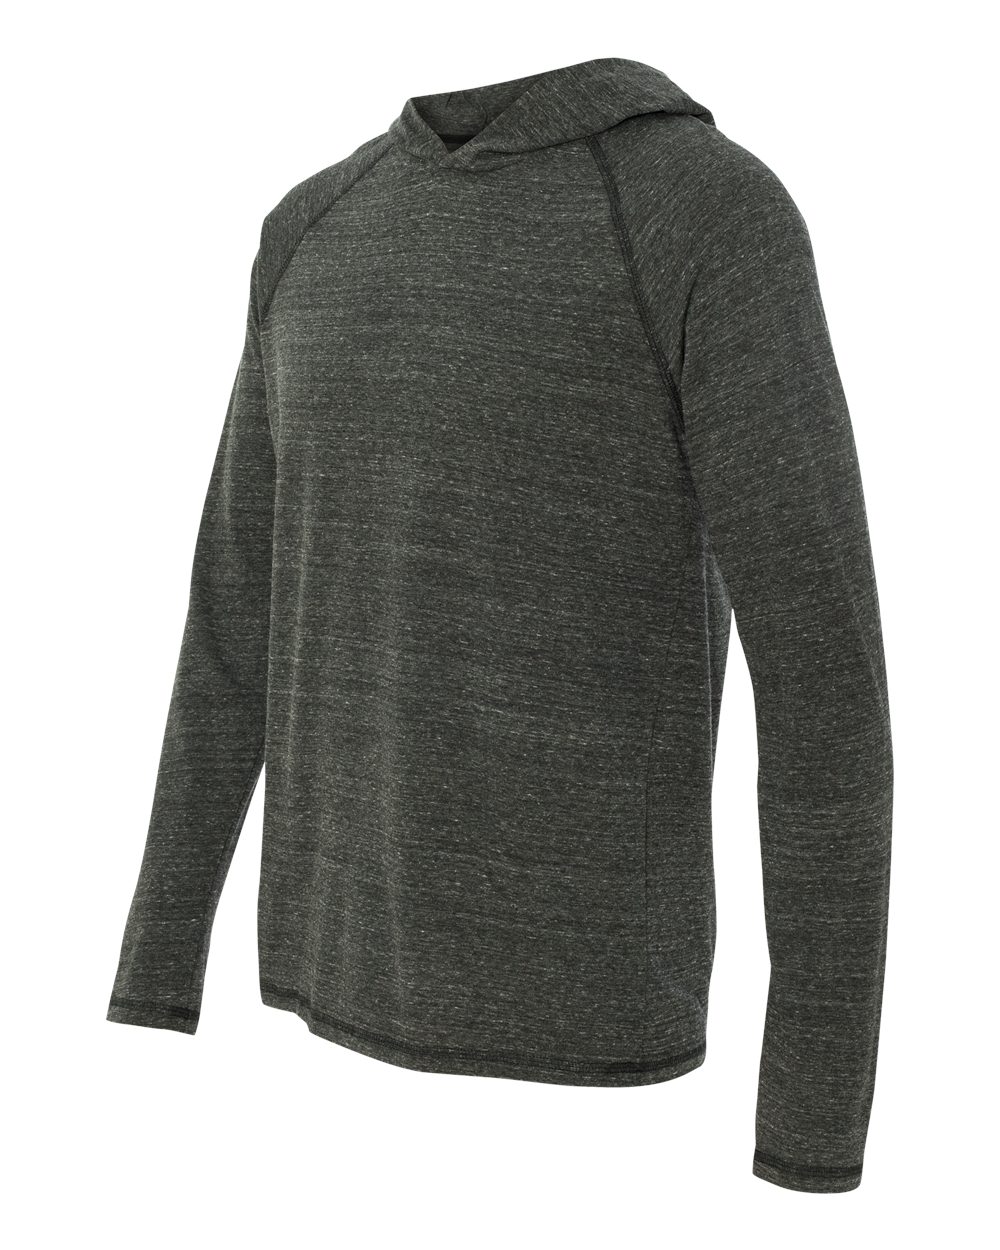 alo - Triblend Jersey Hooded Pullover $15.75